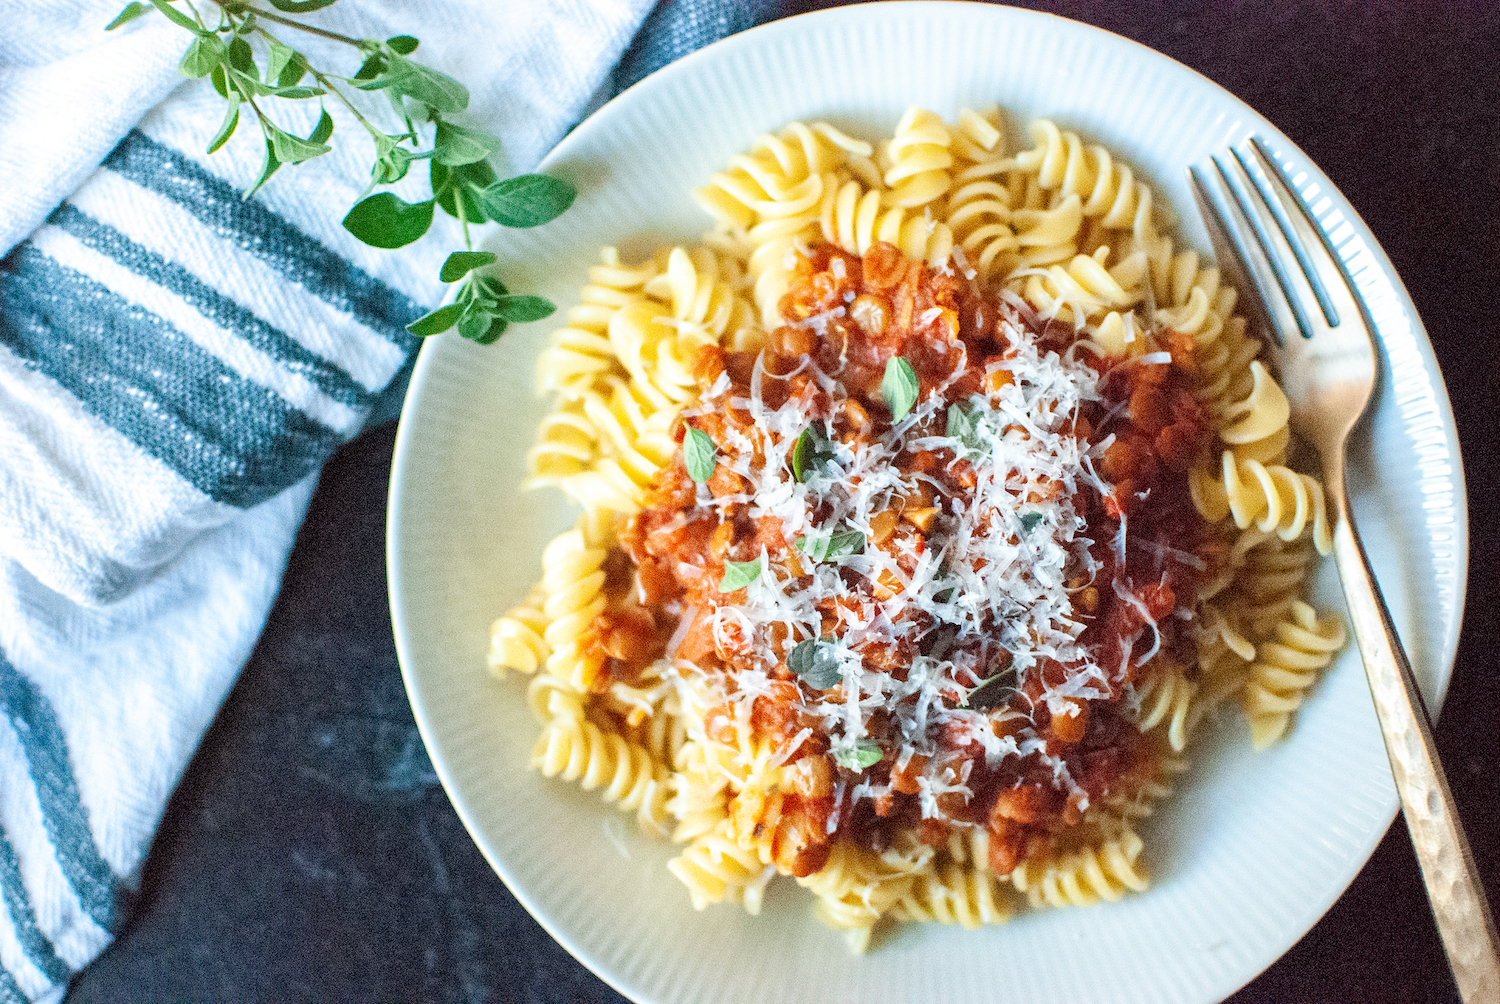 Hearty Lentil Bolognese: My New Cozy Comfort Food Recipe